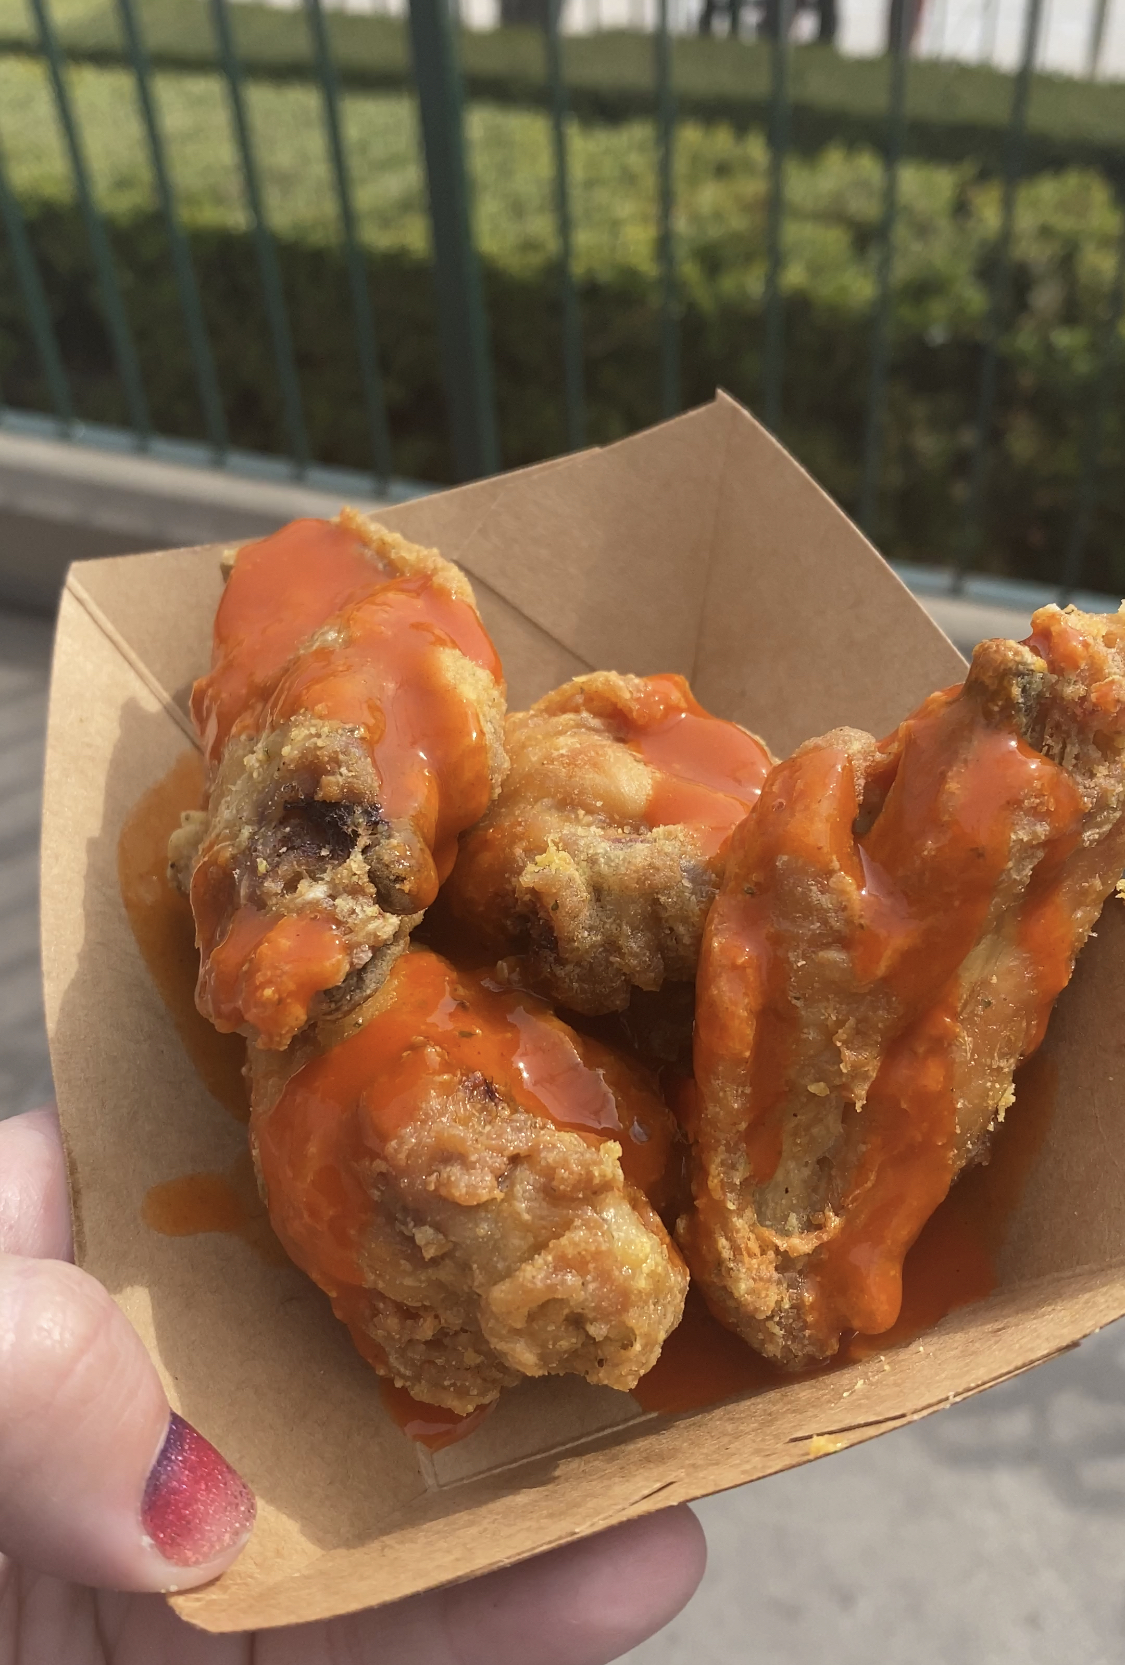 Ranch wings at the Disneyland food and wine festival